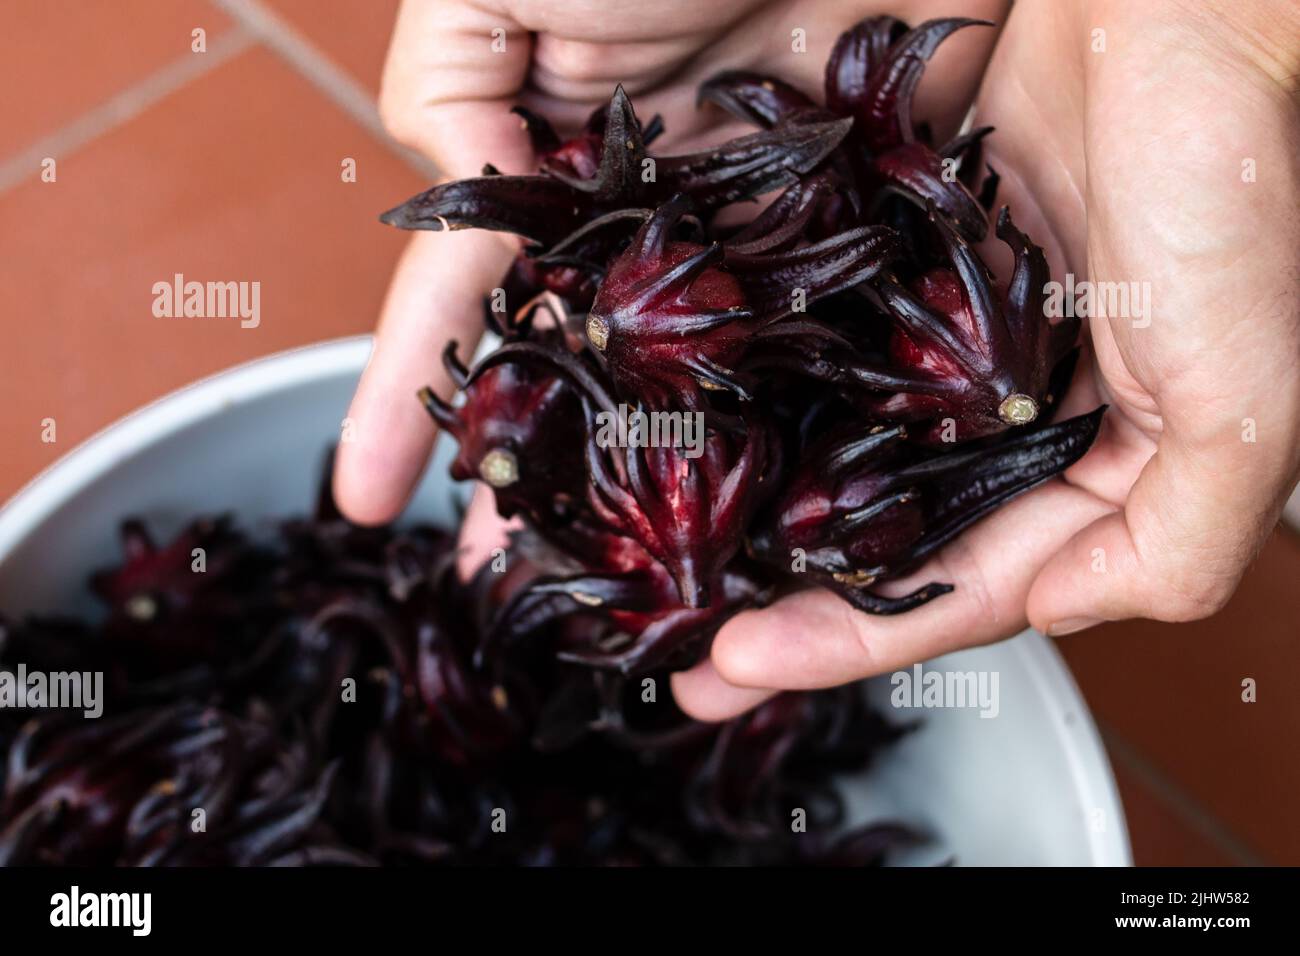 Close-up of hands cradling hibiscus sabdariffa (sorrel or Jamaica) a red flower used to make sorrel drink in Caribbean countries at Christmas time. Stock Photo